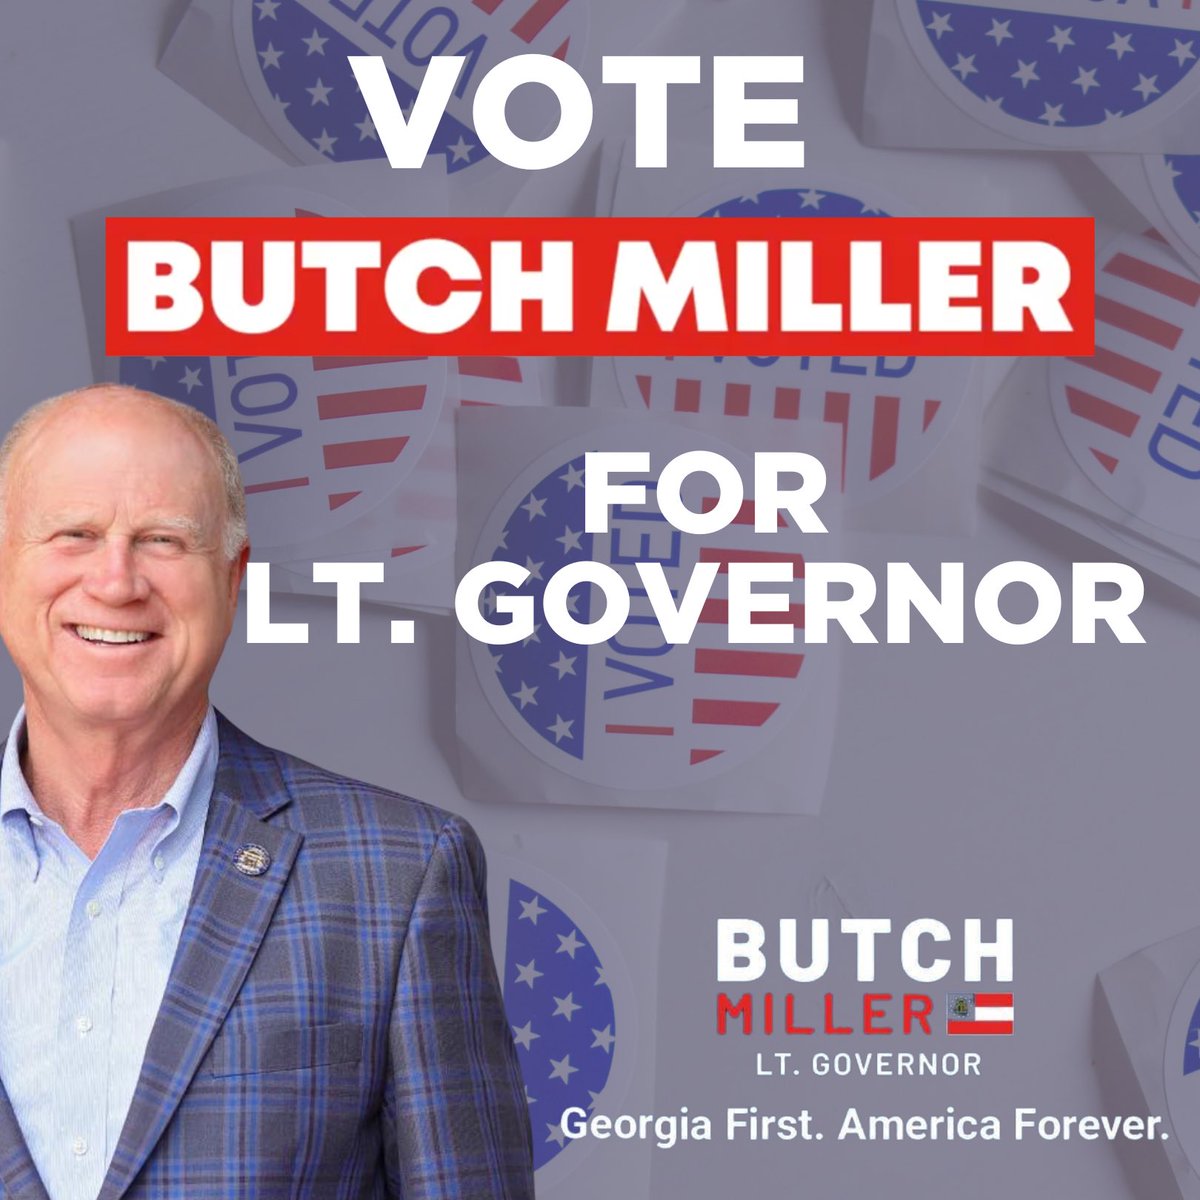 Polls close in 5 hours! Make sure to get to the polls before 7pm and vote Butch Miller for Lt. Governor!